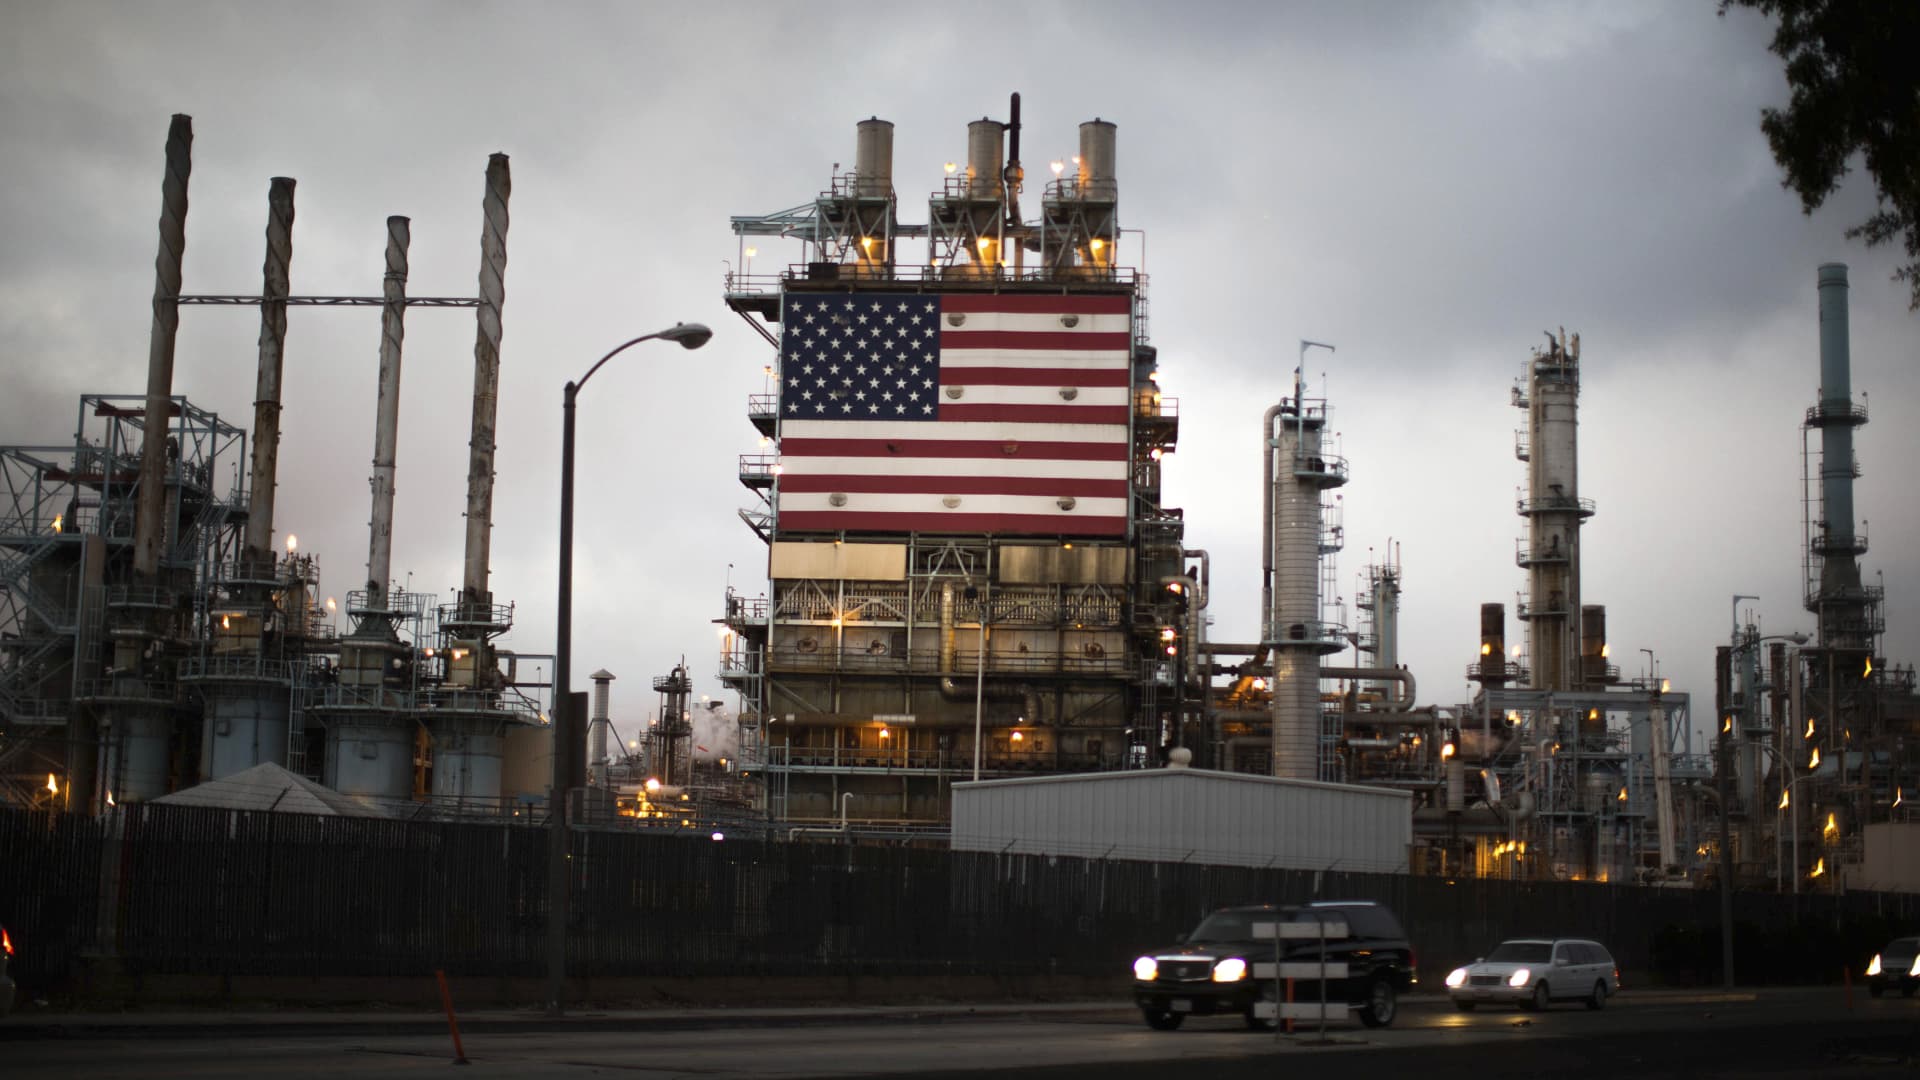 The U.S. flag is displayed at Tesoro's Los Angeles oil refinery.